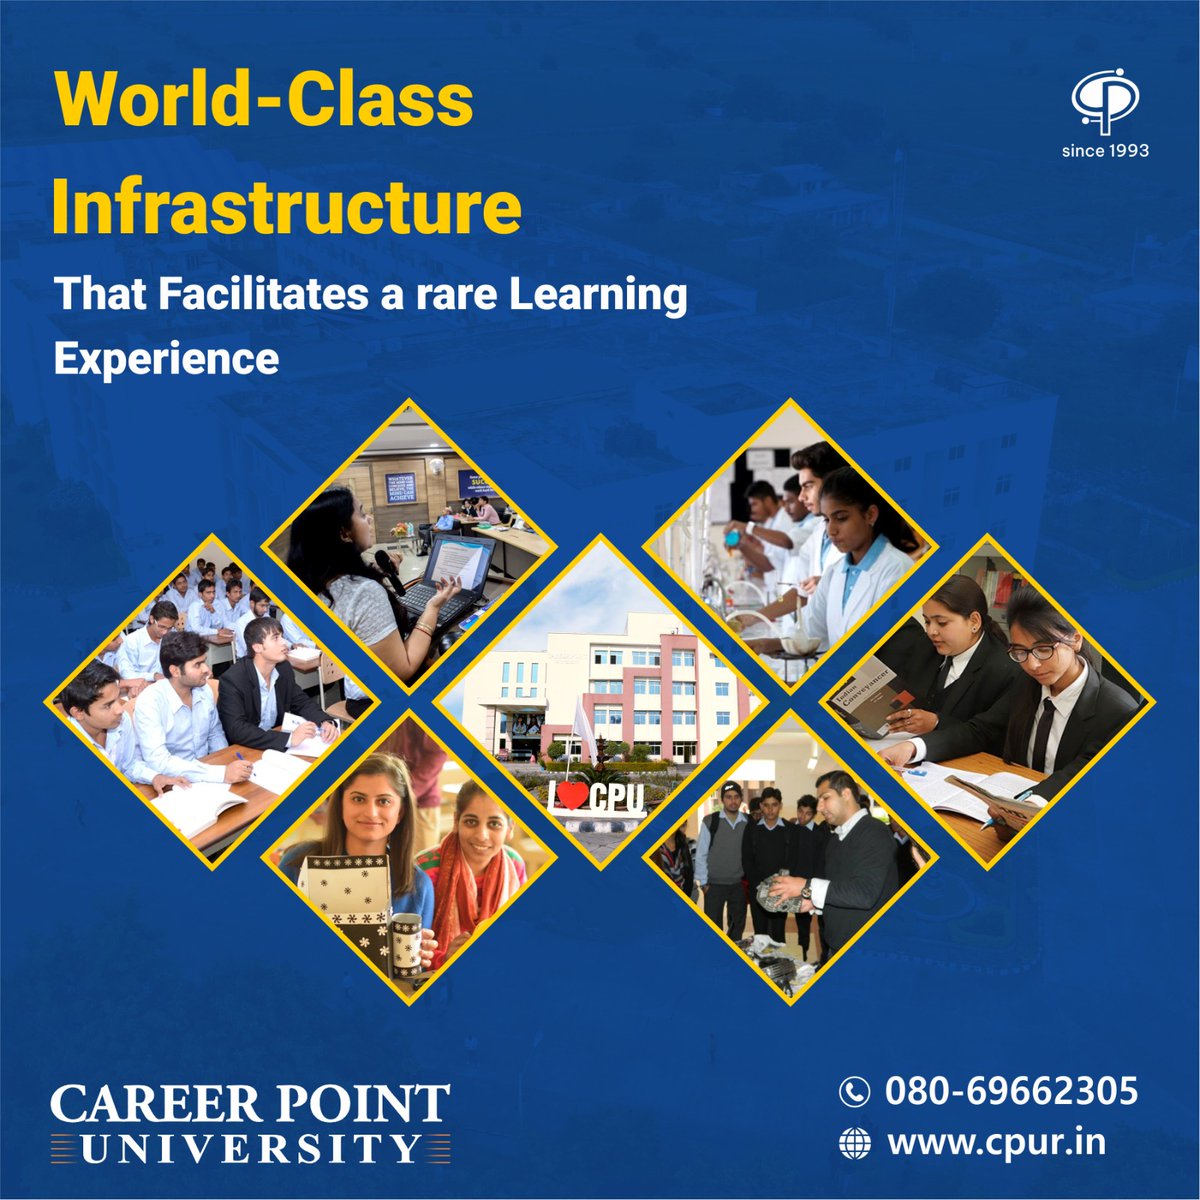 🌟 At Career Point University, we take pride in offering a world-class infrastructure that transforms education into exceptional experience! 🏫

#CareerPointUniversity #CPUniversity #WorldClassInfrastructure #ExceptionalEducation #InnovativeLearning #FinestEducation